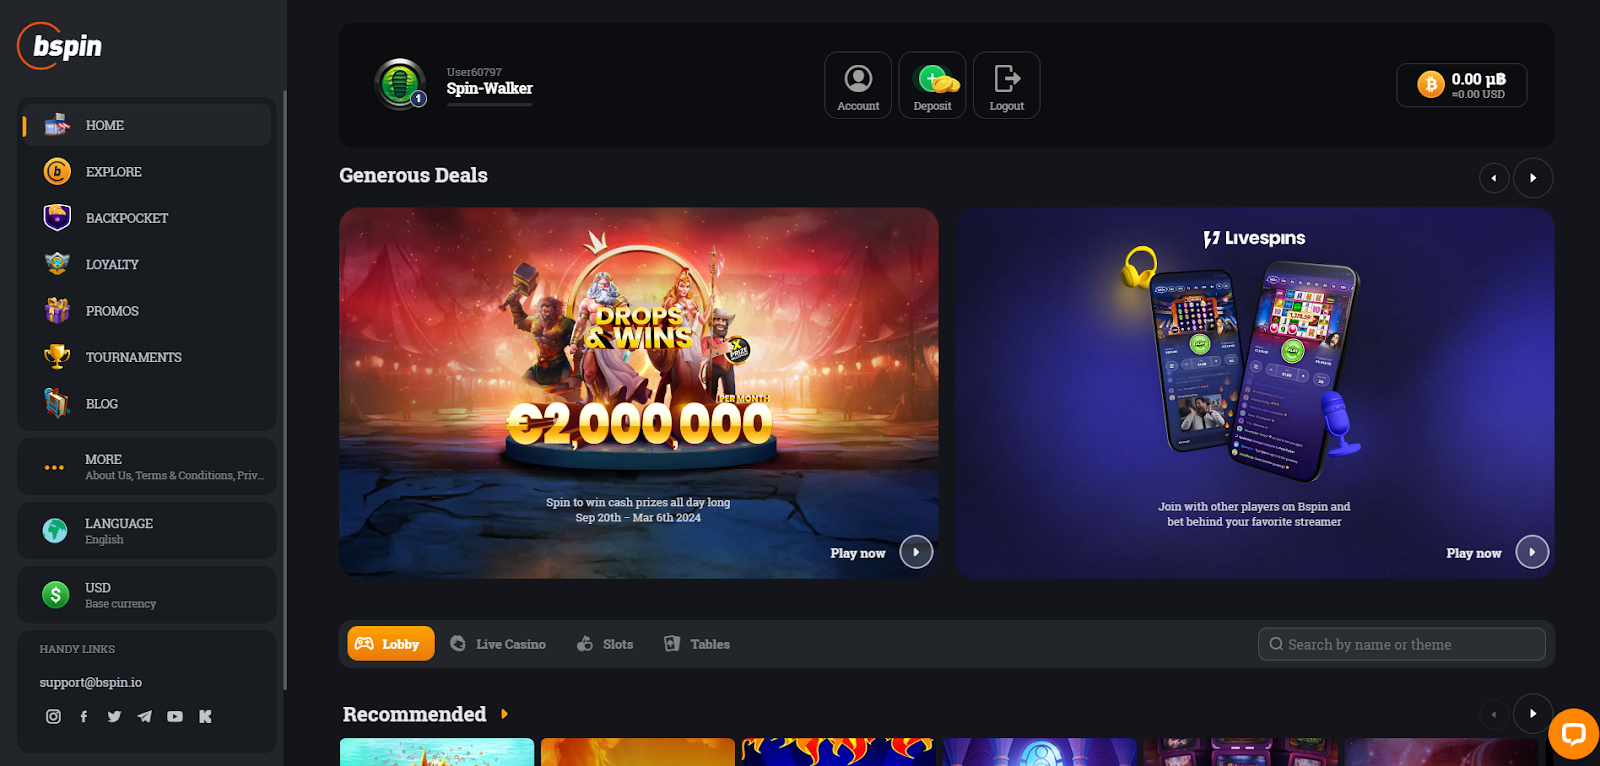 Bspin focuses on Livespins and promotional deals on its main page